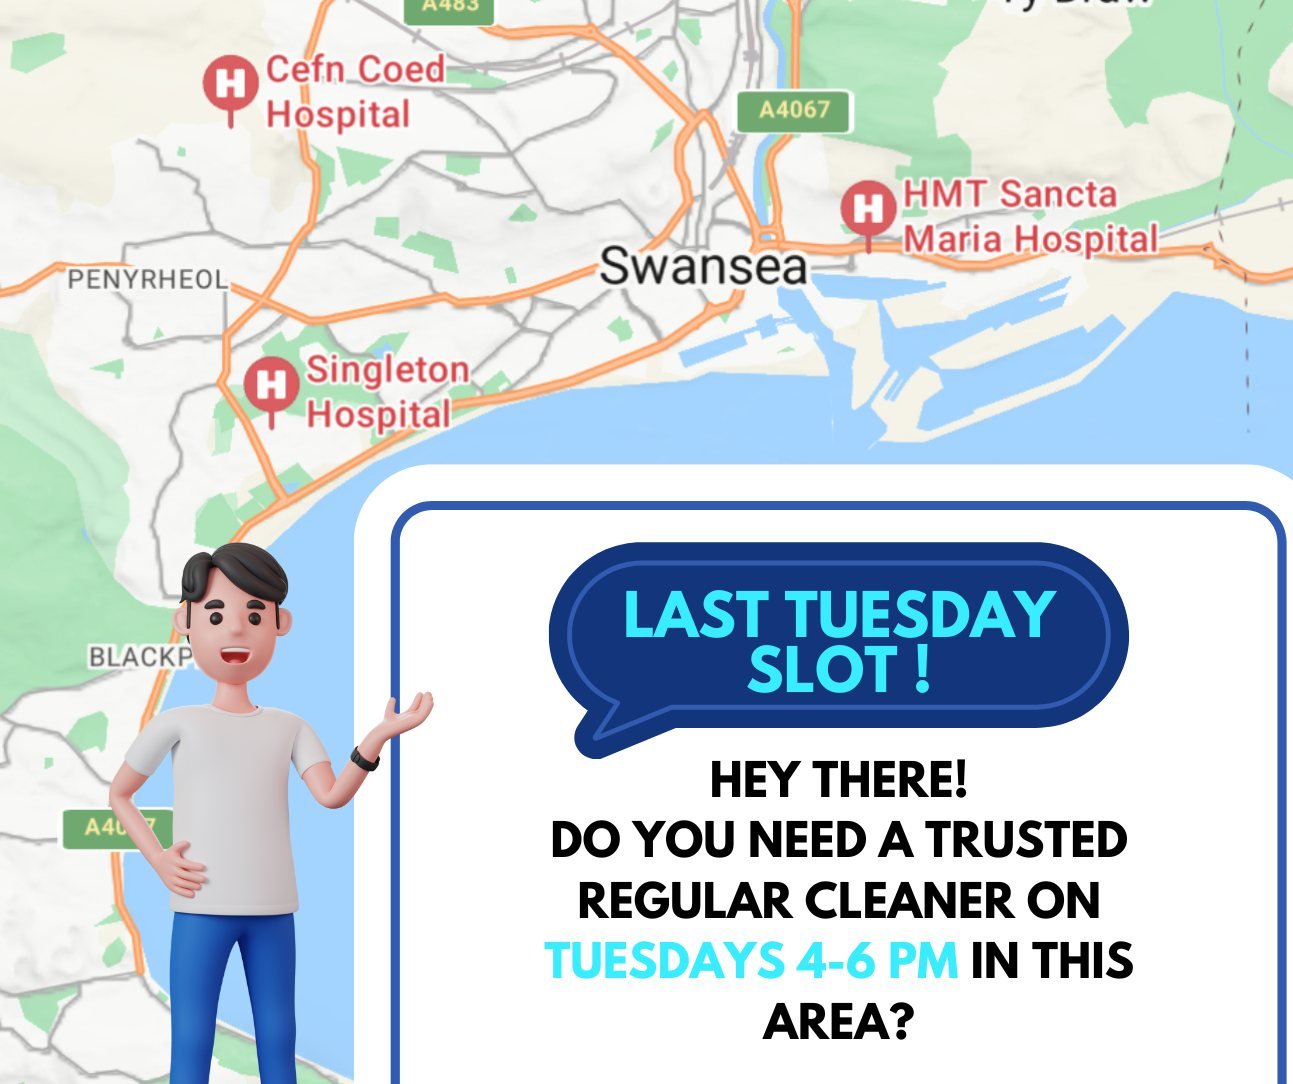 Hey, Ollie here! 😁👋
Do you need your cleaning chores completed for you? live in the Swansea area? I'm looking to fill the last slot on Tuesdays between 4-6 PM (weekly or Bi weekly) . Please feel free to get in touch for other days with availability